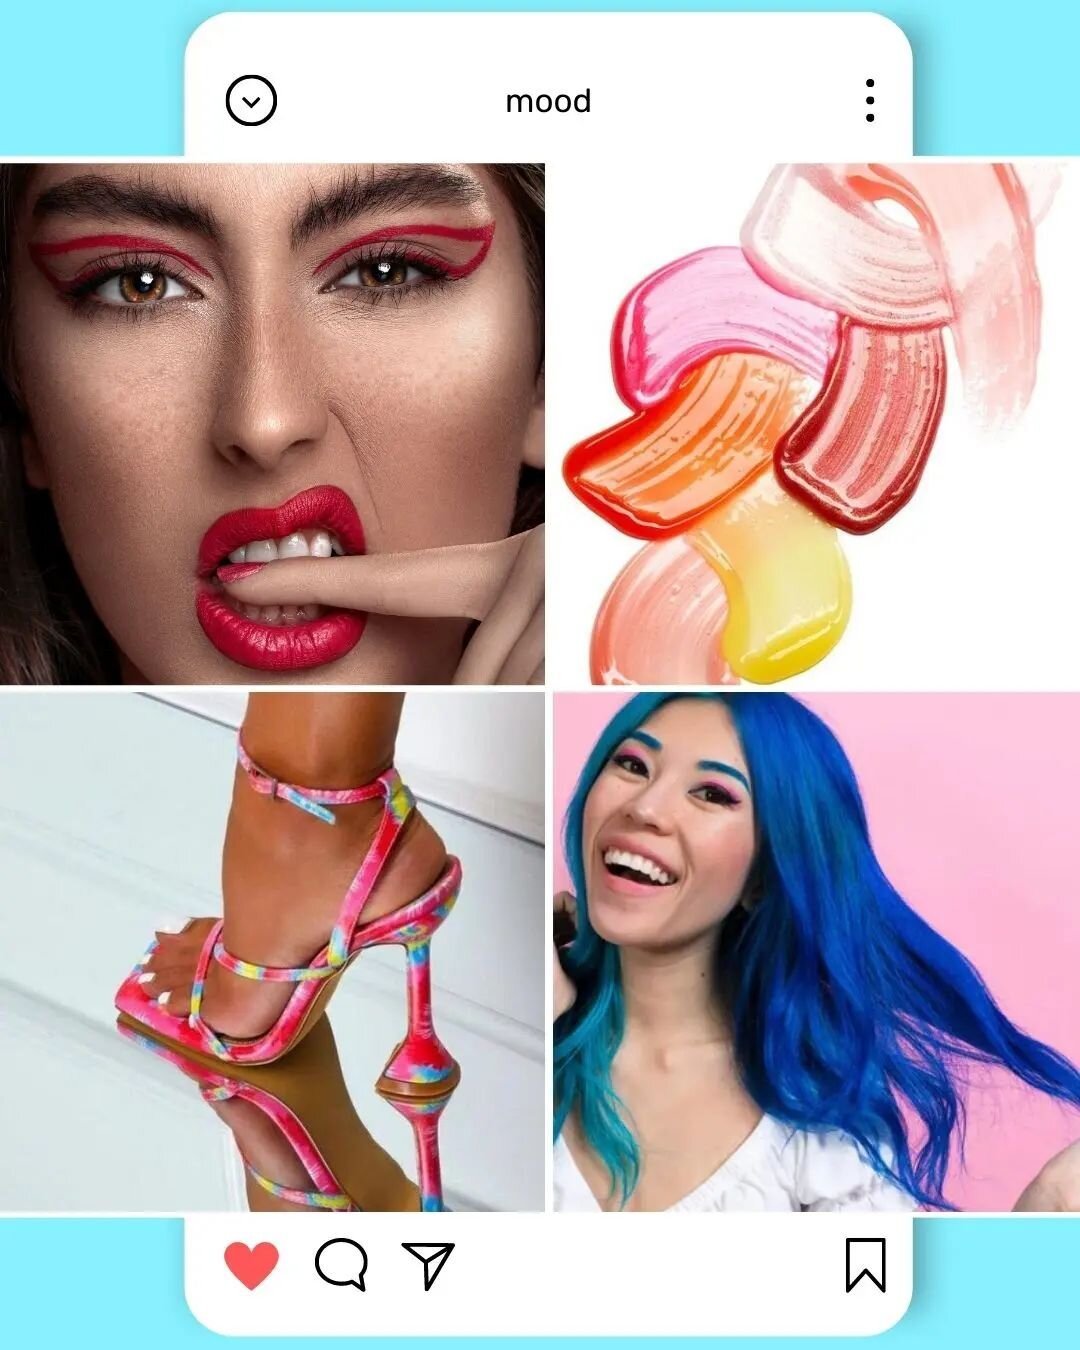 Mood board for Spark beauty brand. 
Bright bold and confident. A beauty brand that empowers women to be unique and to go for it in life.
.
.
.
.
.
.
.
,#moodboards #moodboard #makeupbrand #makeup #fun #inspiration #bold #branding #designerlife #creat